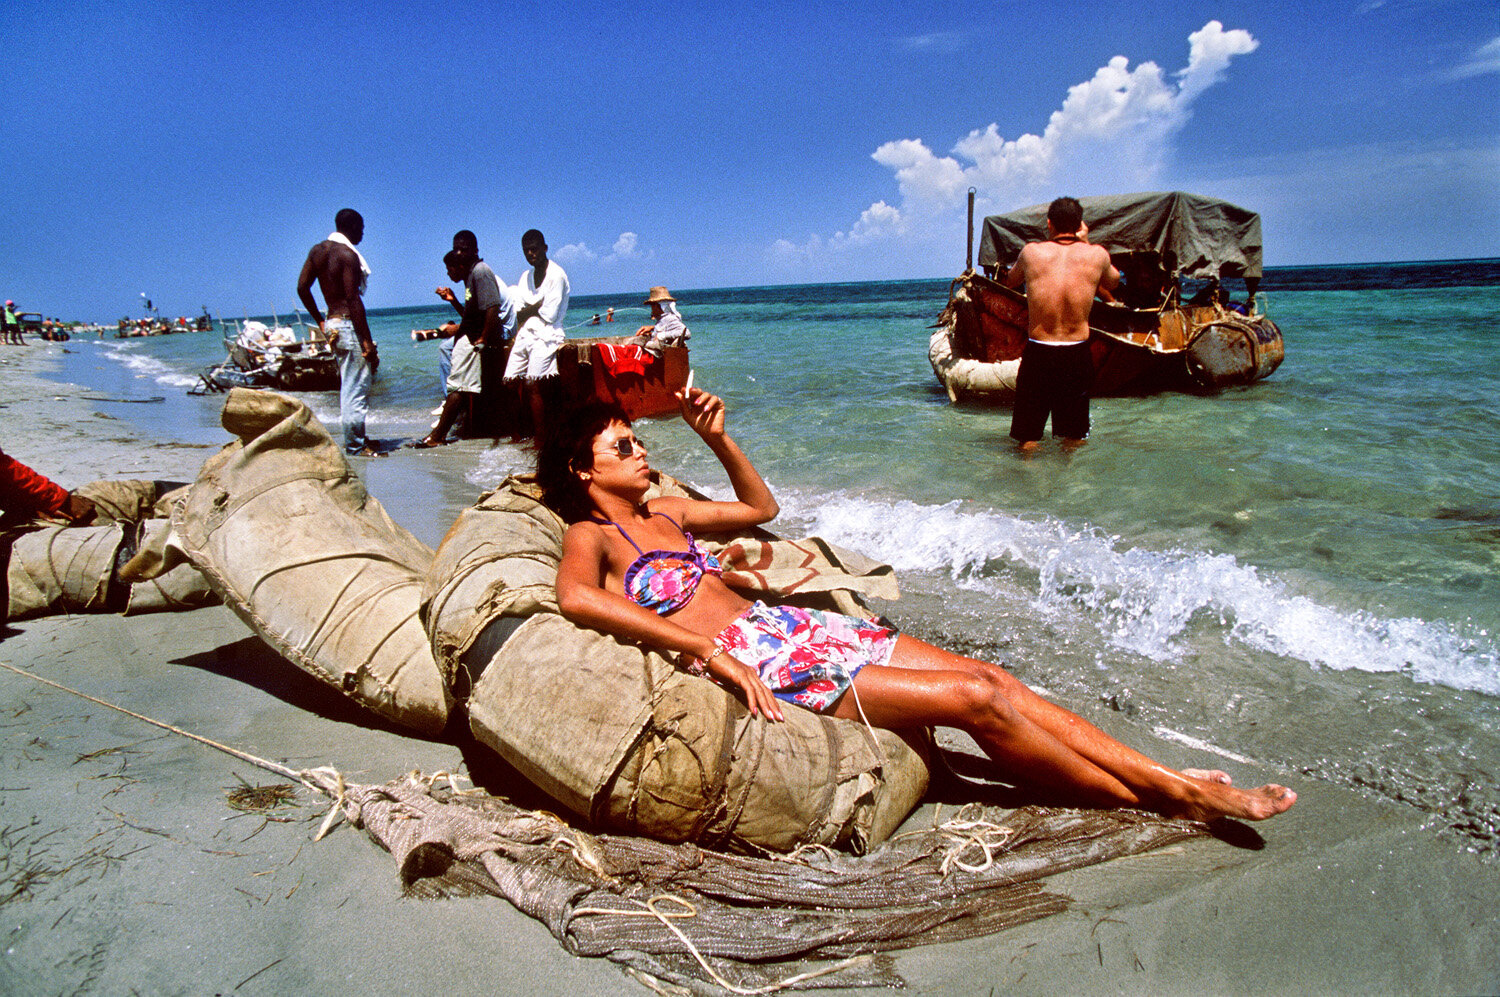  A young Cuban and others wait for the tide to allow the rafts to leave. 